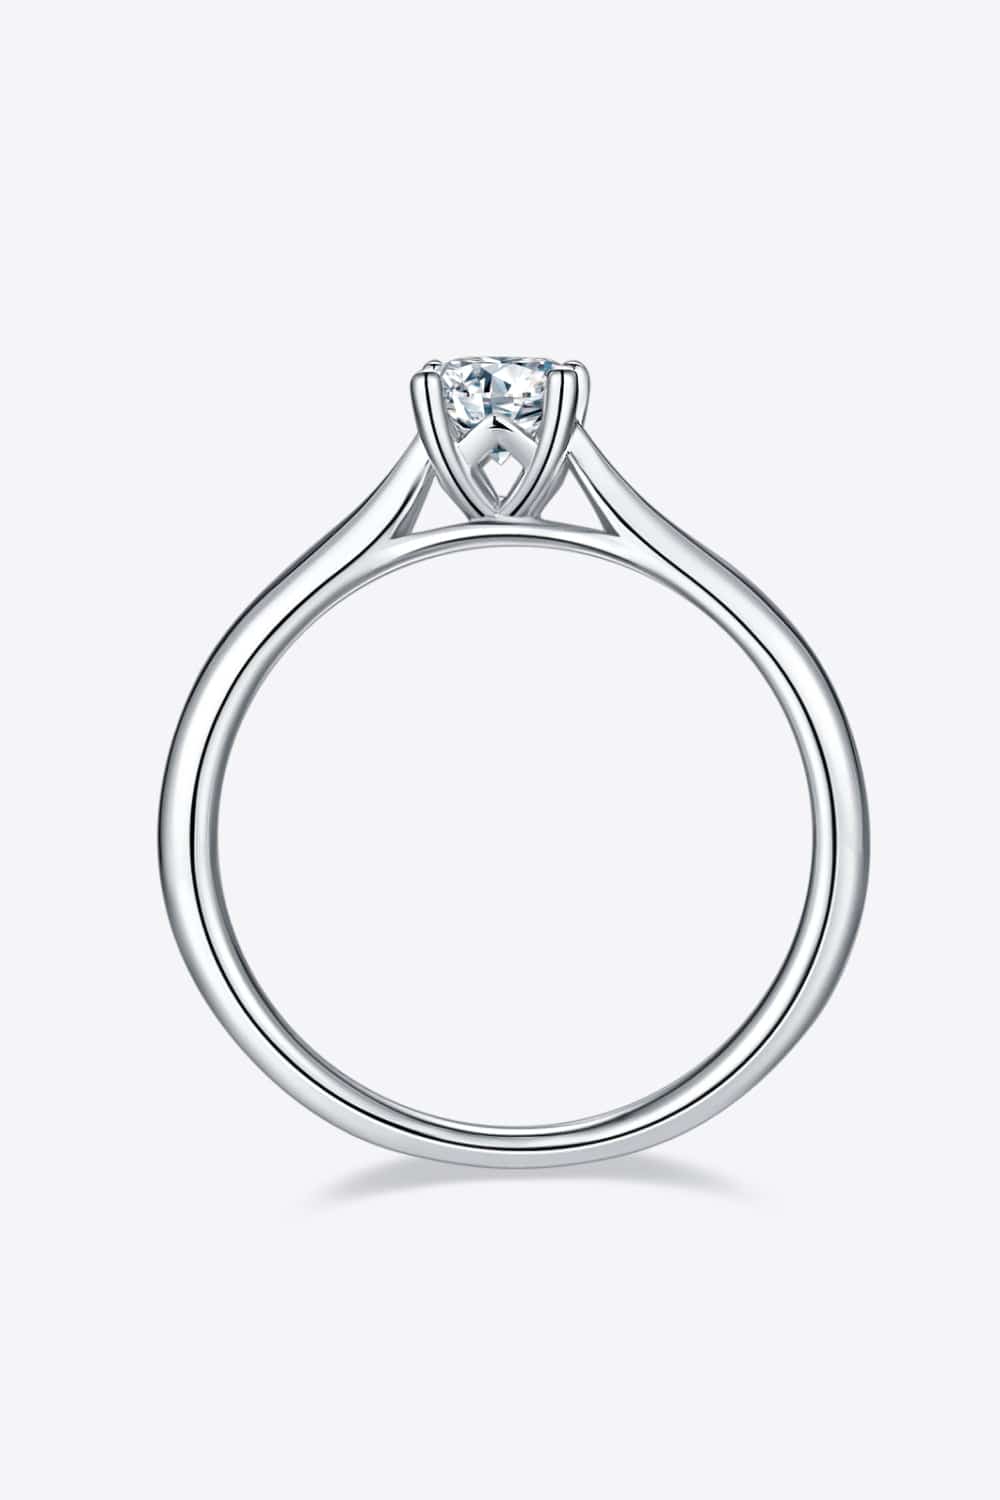 Moissanite 925 Sterling Silver Solitaire Ring